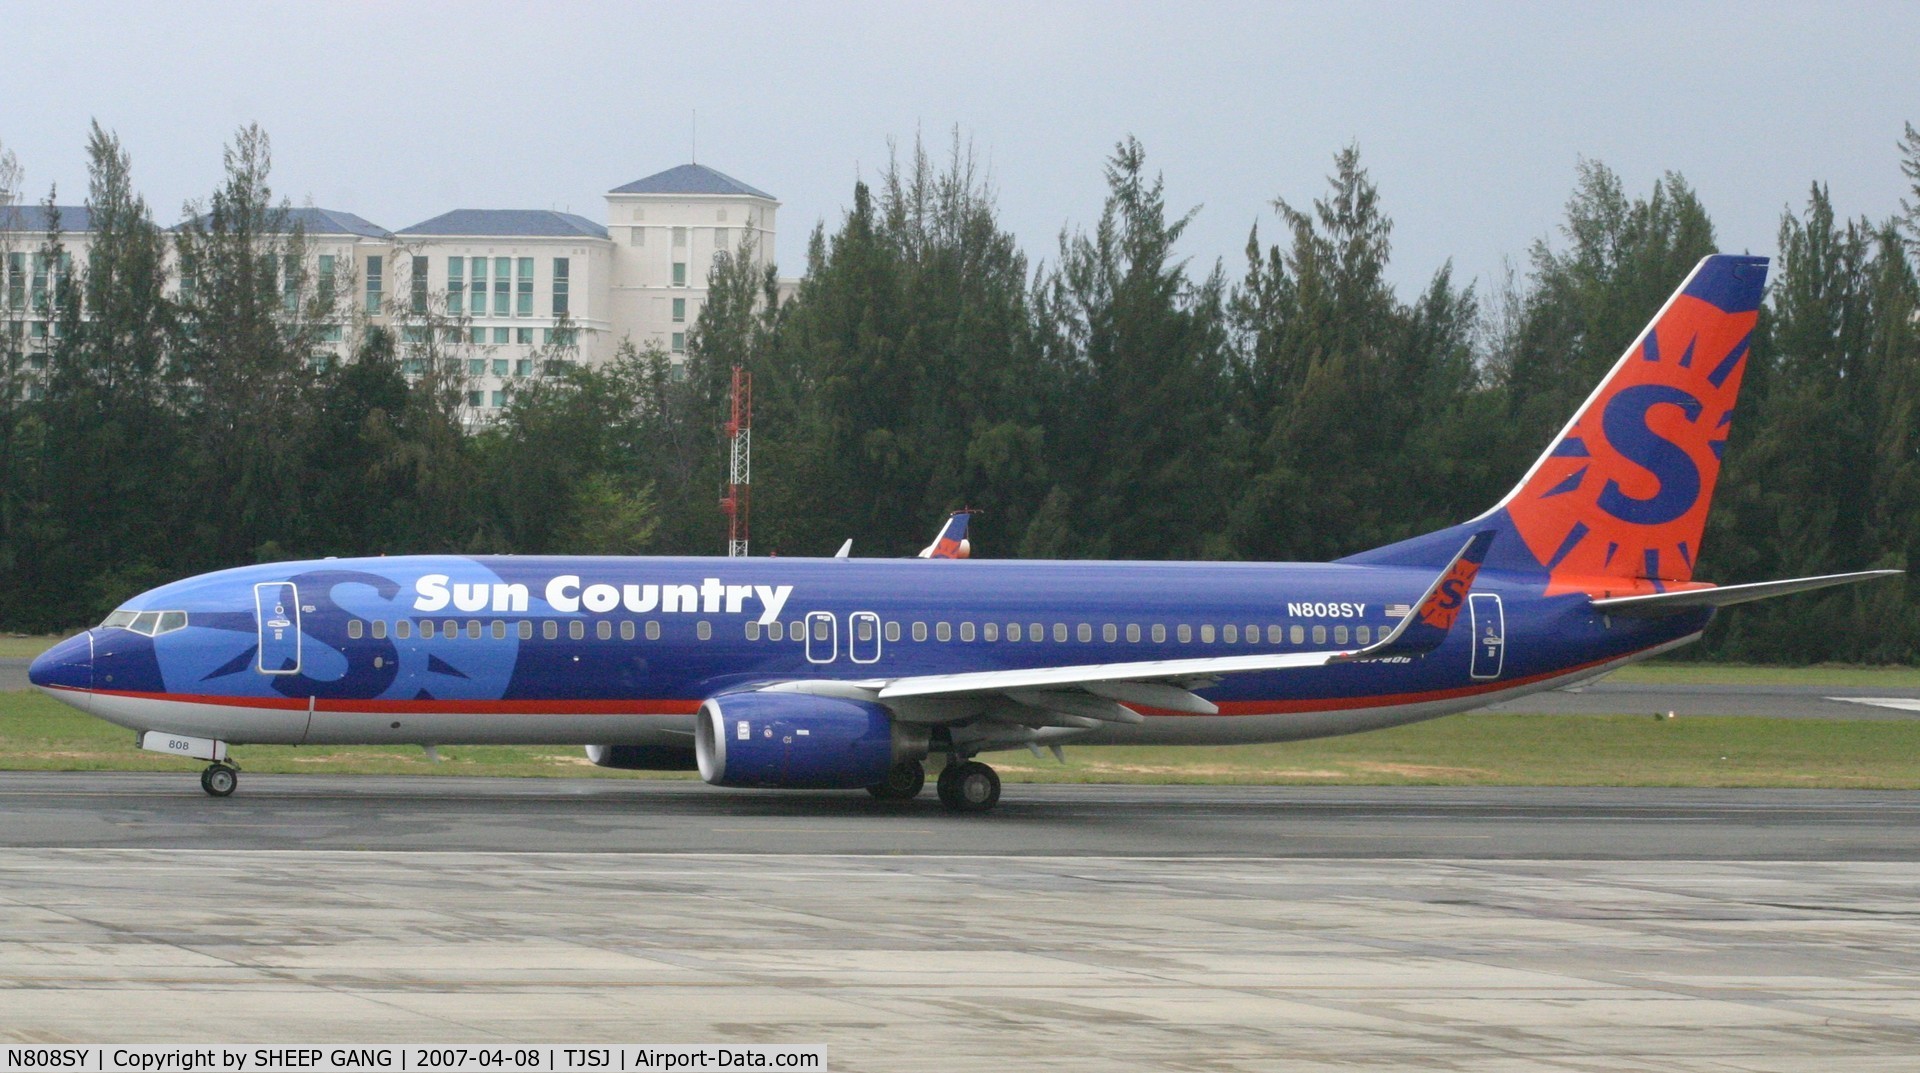 N808SY, 2005 Boeing 737-8BK C/N 33021, Sun Country taxing to take off